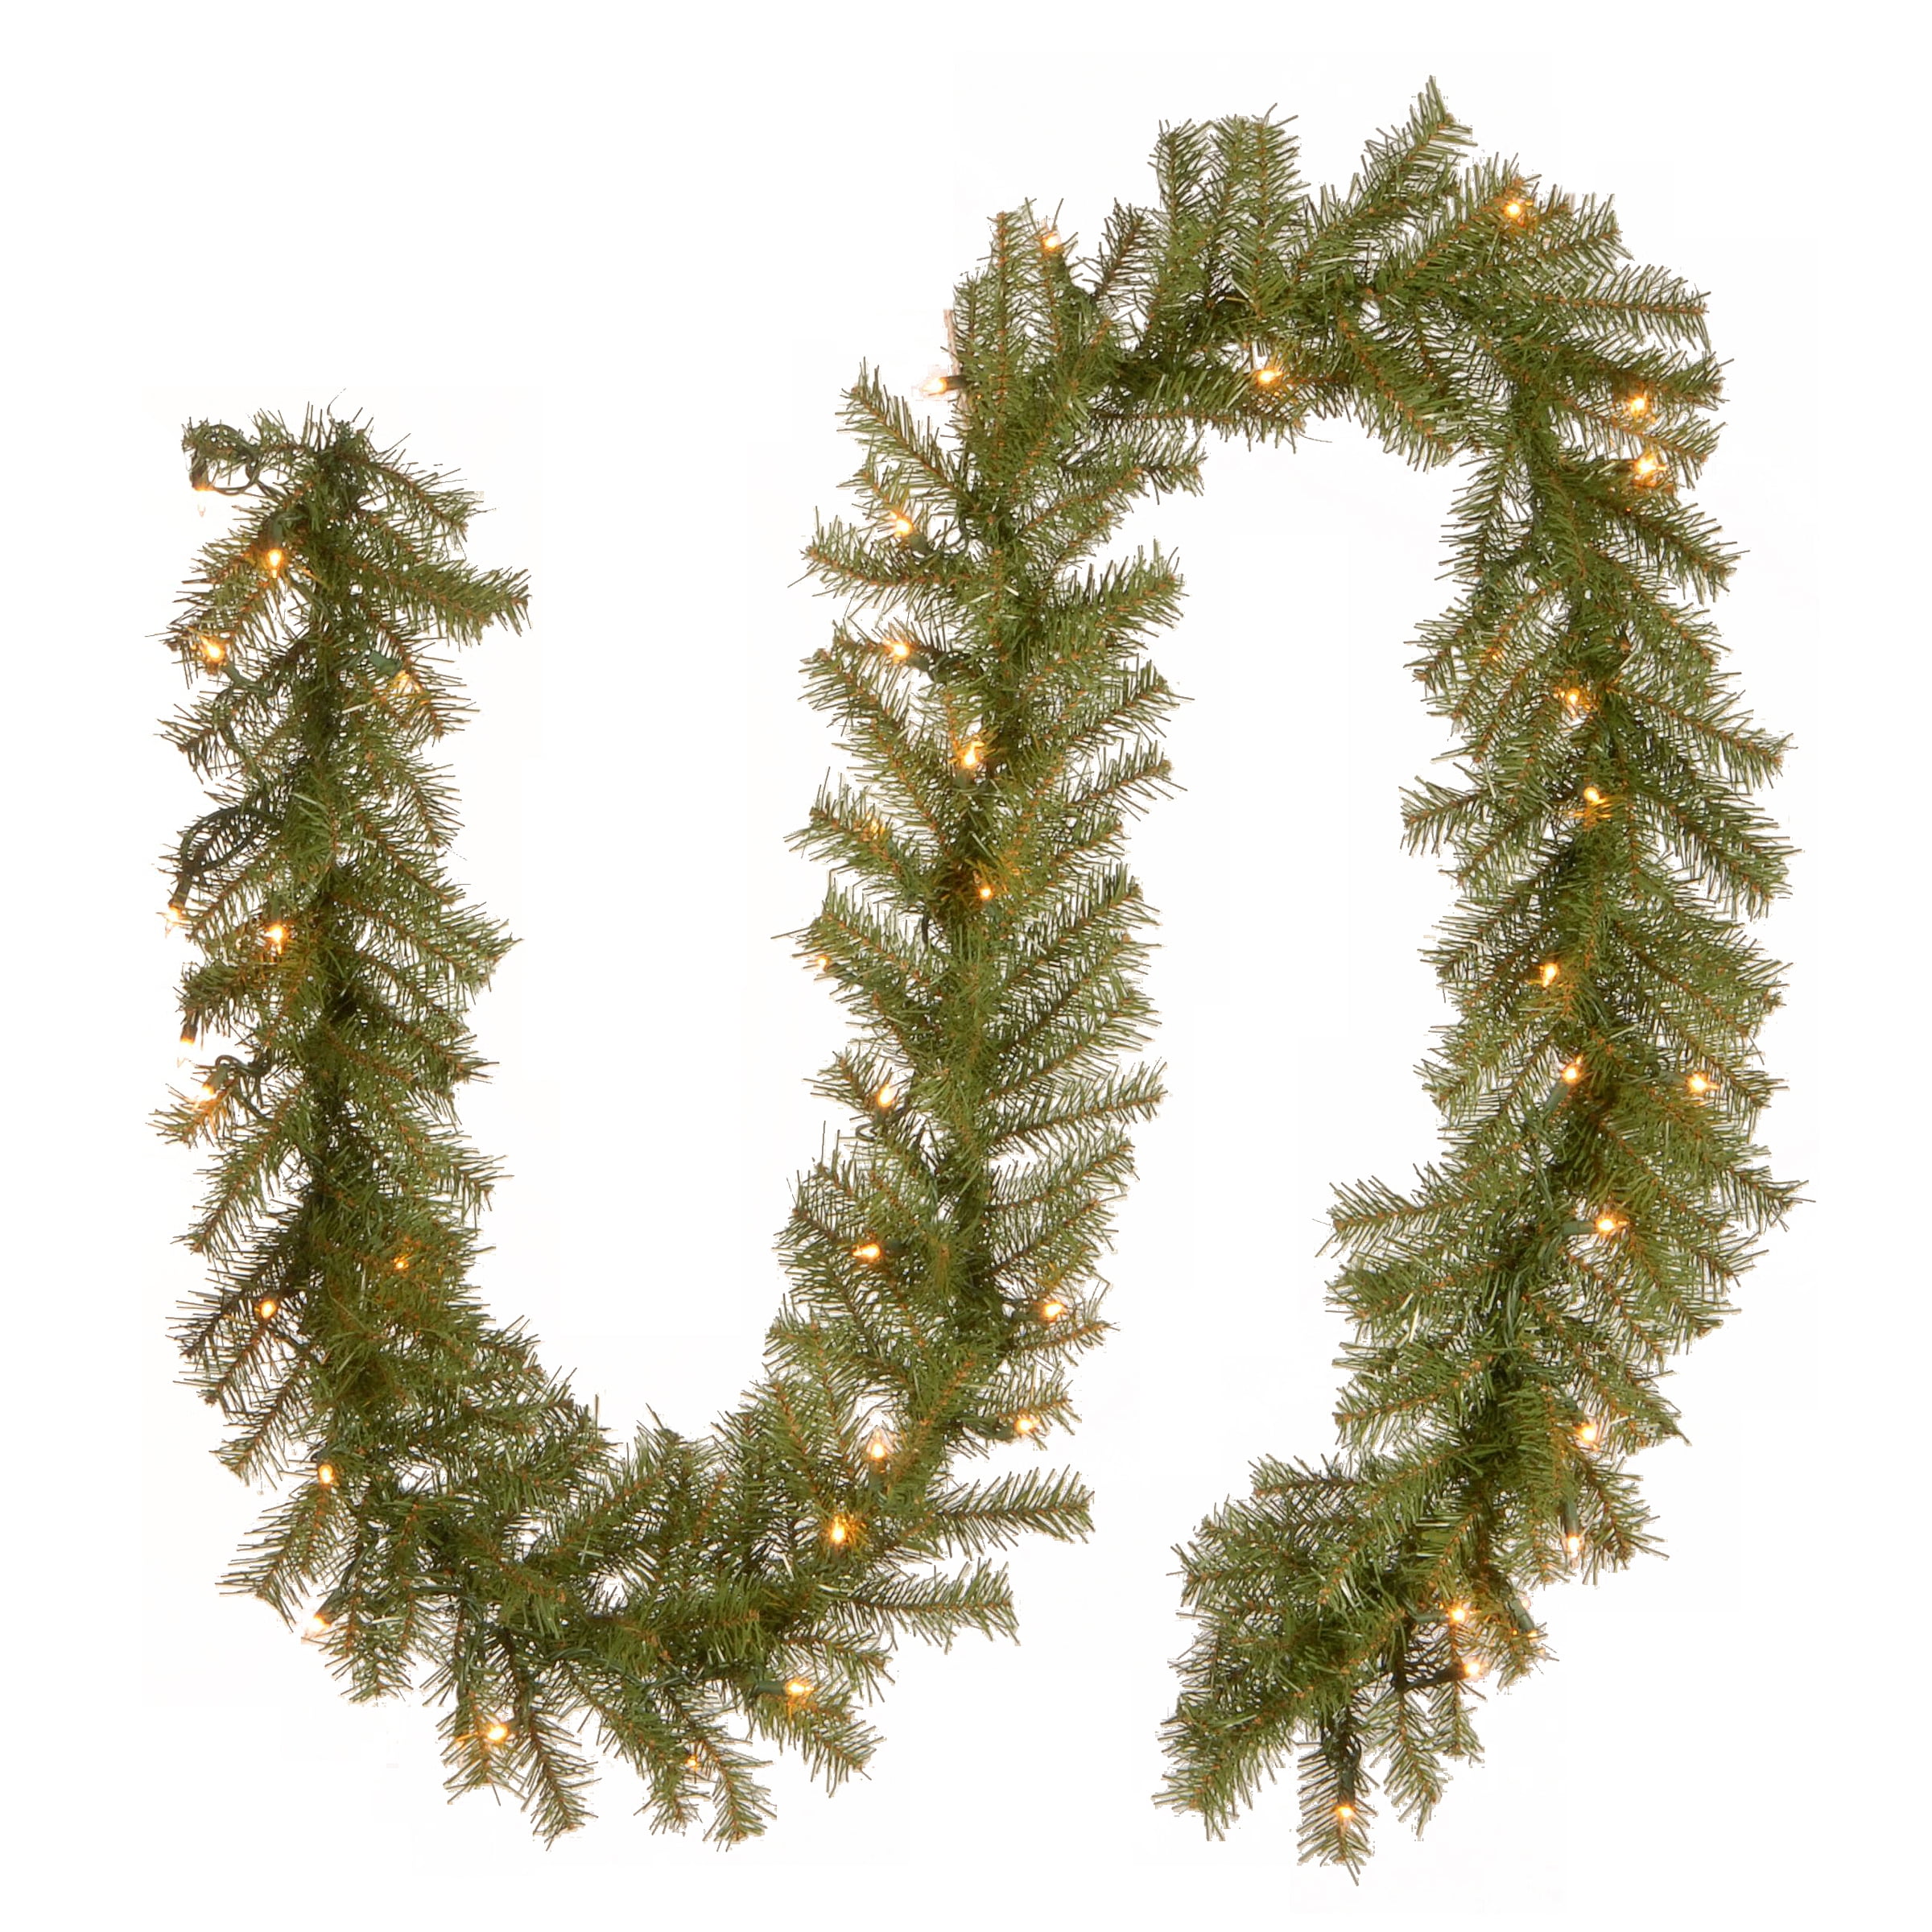 Details about   Vickerman 50' x 12" Camdon Garland Dura-Lit 400CL Case of 1 A861109 